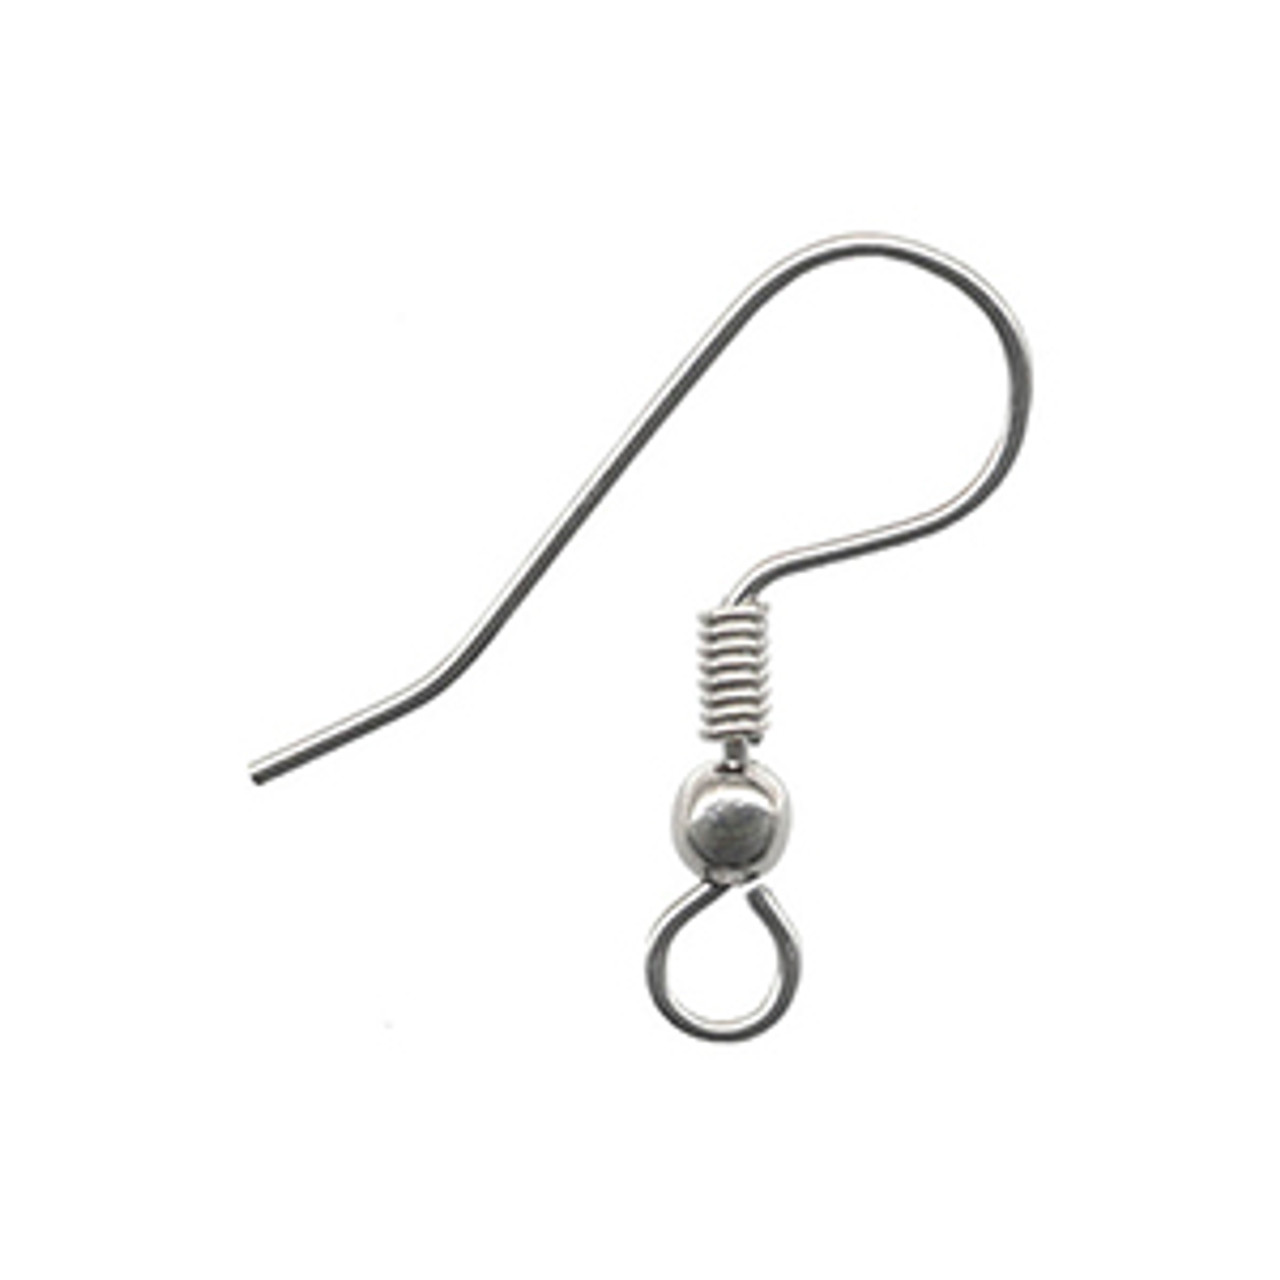 WOCRAFT 200pcs Stainless Steel Ball and Coil Earring Hooks Findings Ear  Wires Fish Hook Earrings Hoops Ear Wire for DIY Jewelry Making (10169)